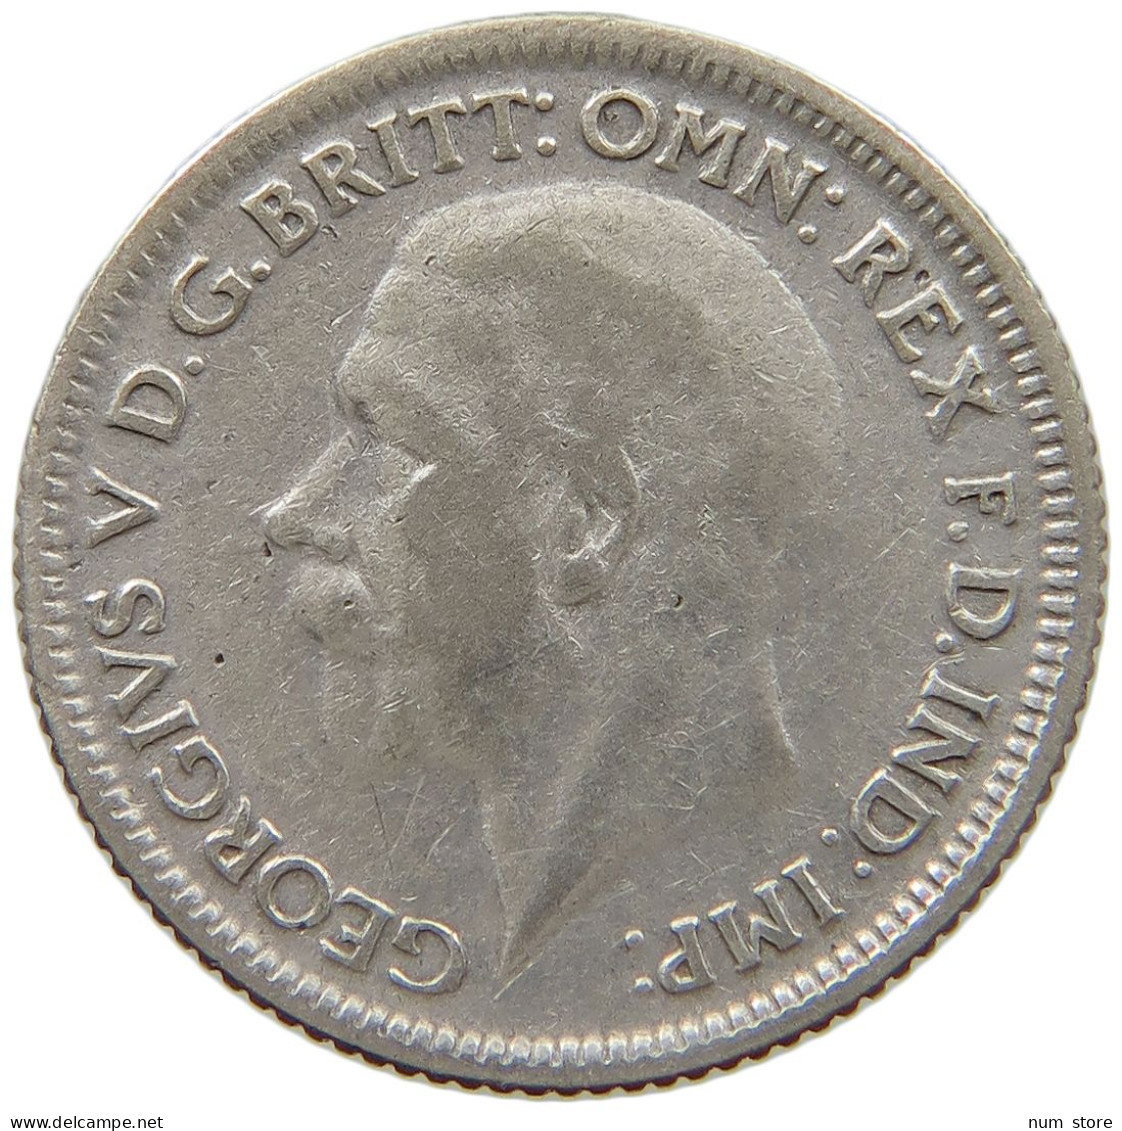 GREAT BRITAIN SIXPENCE 1928 #a069 0241 - H. 6 Pence